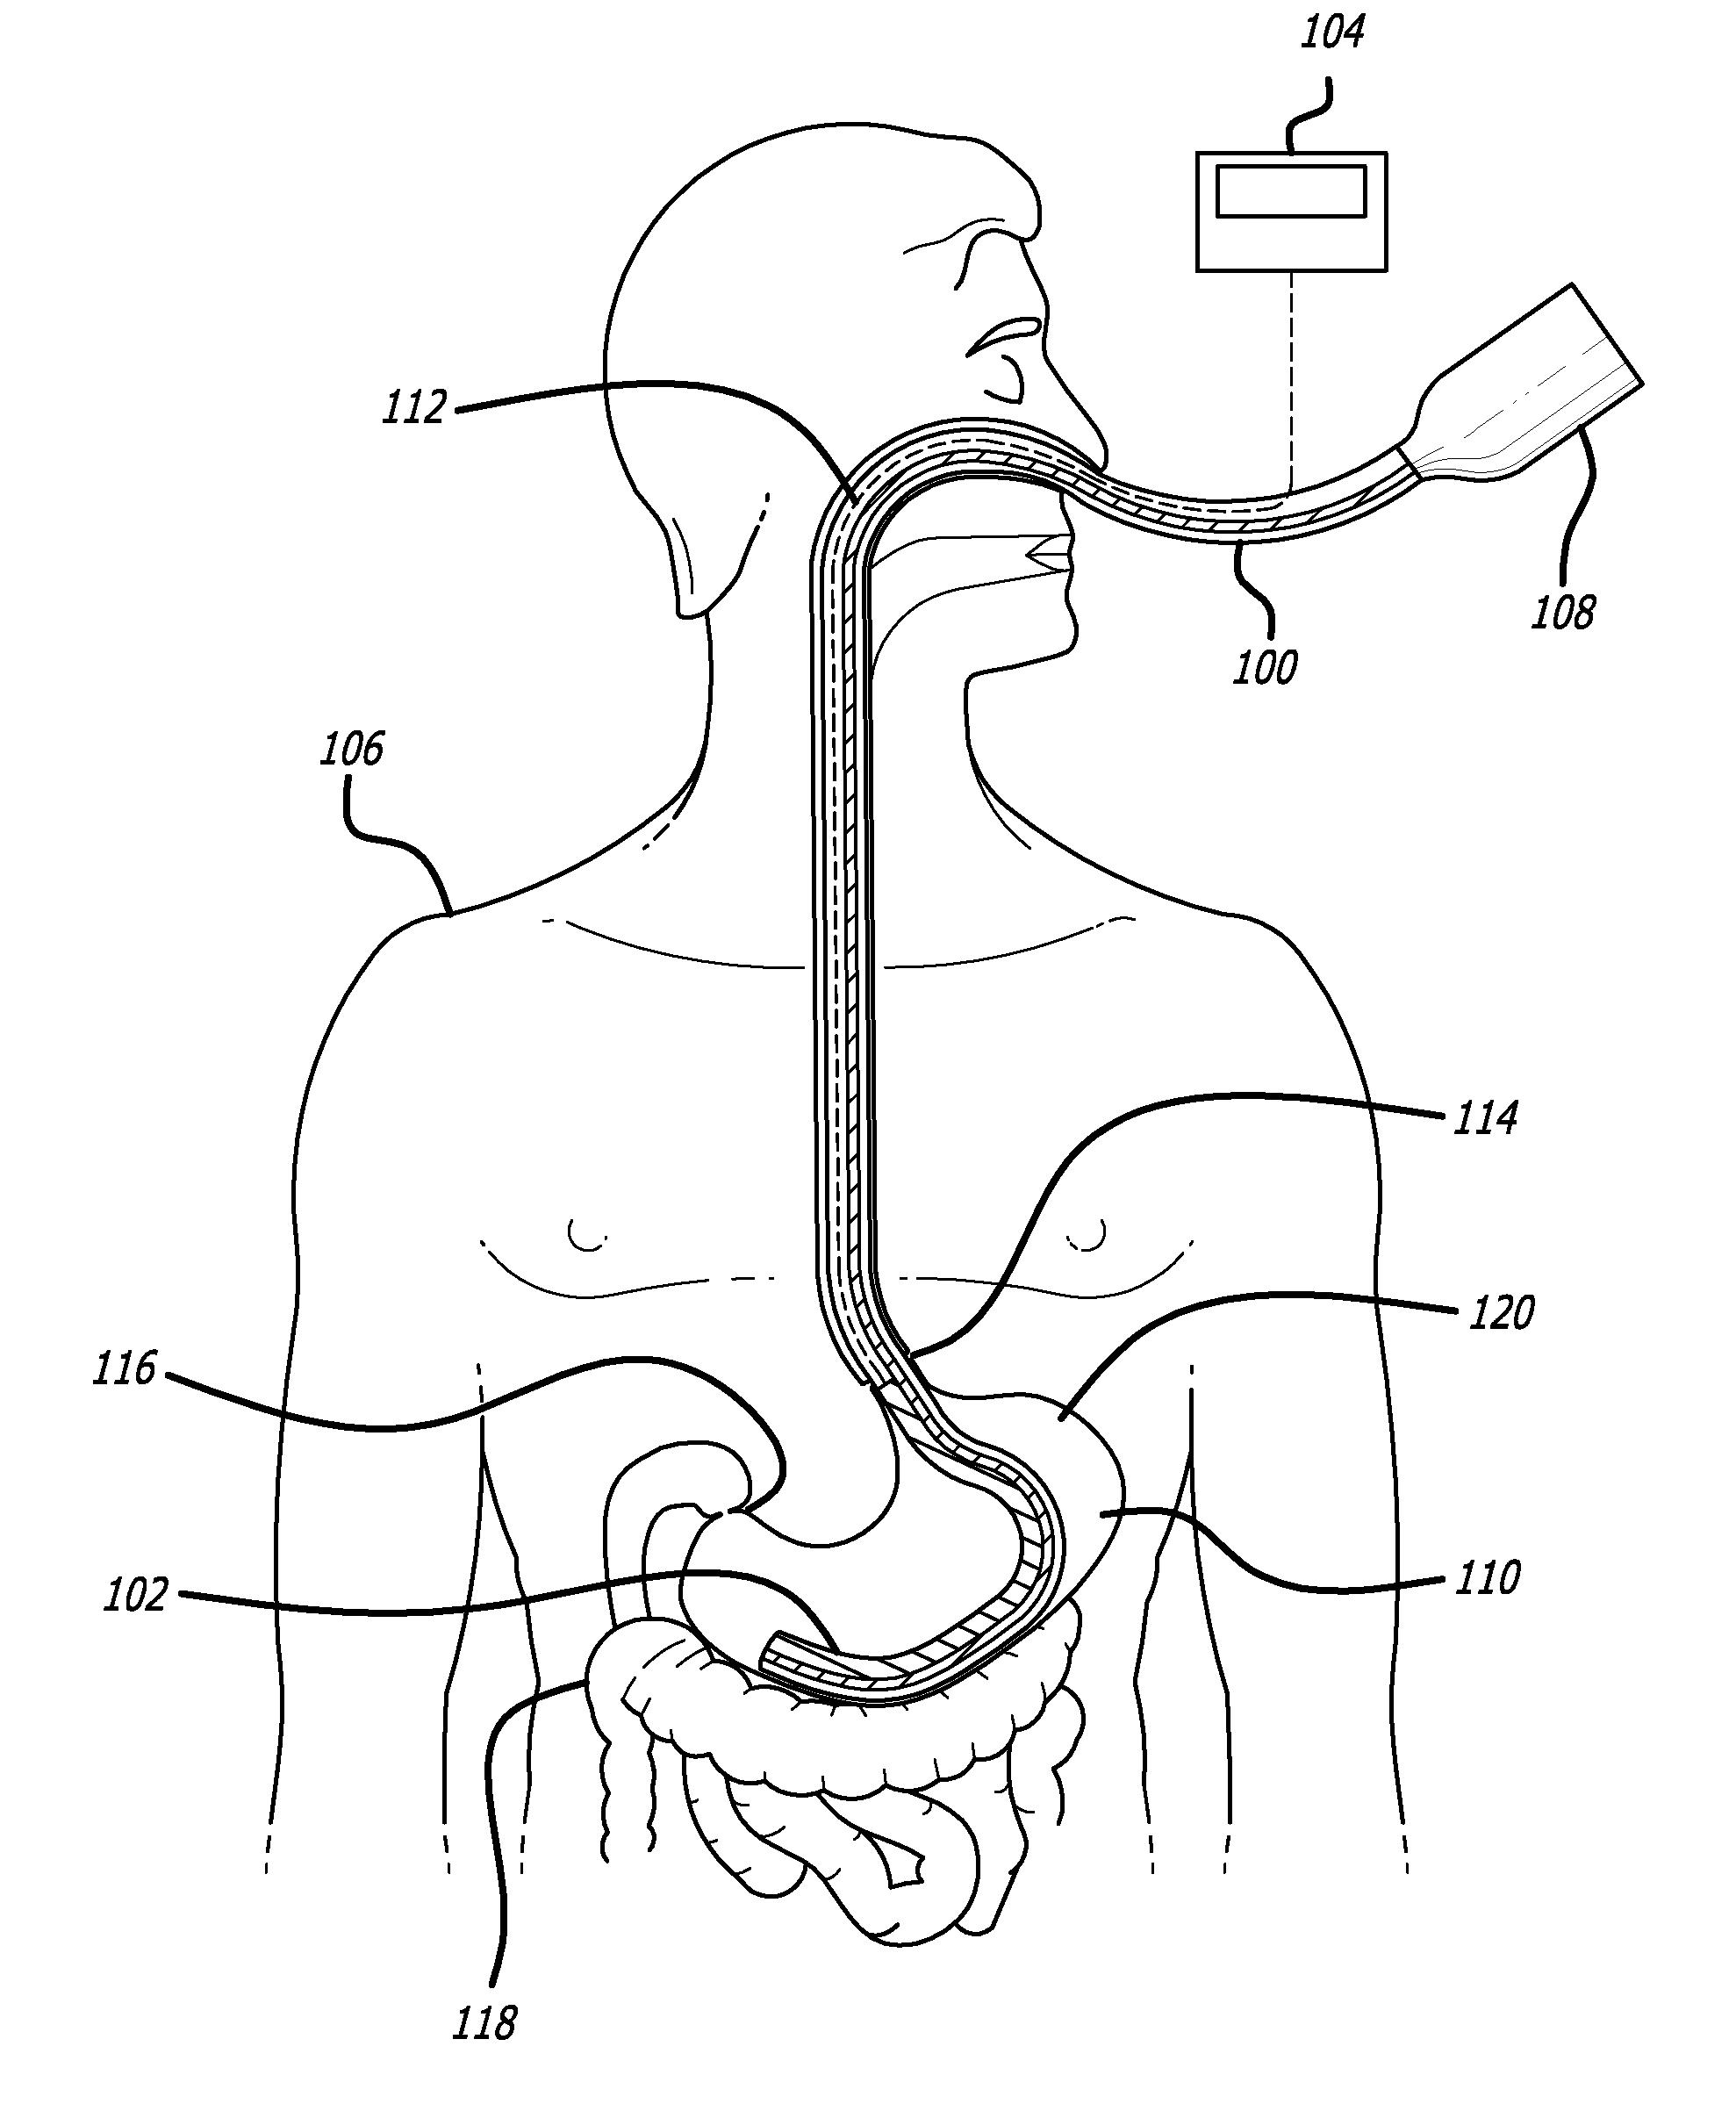 Ng tube with gastric volume detection